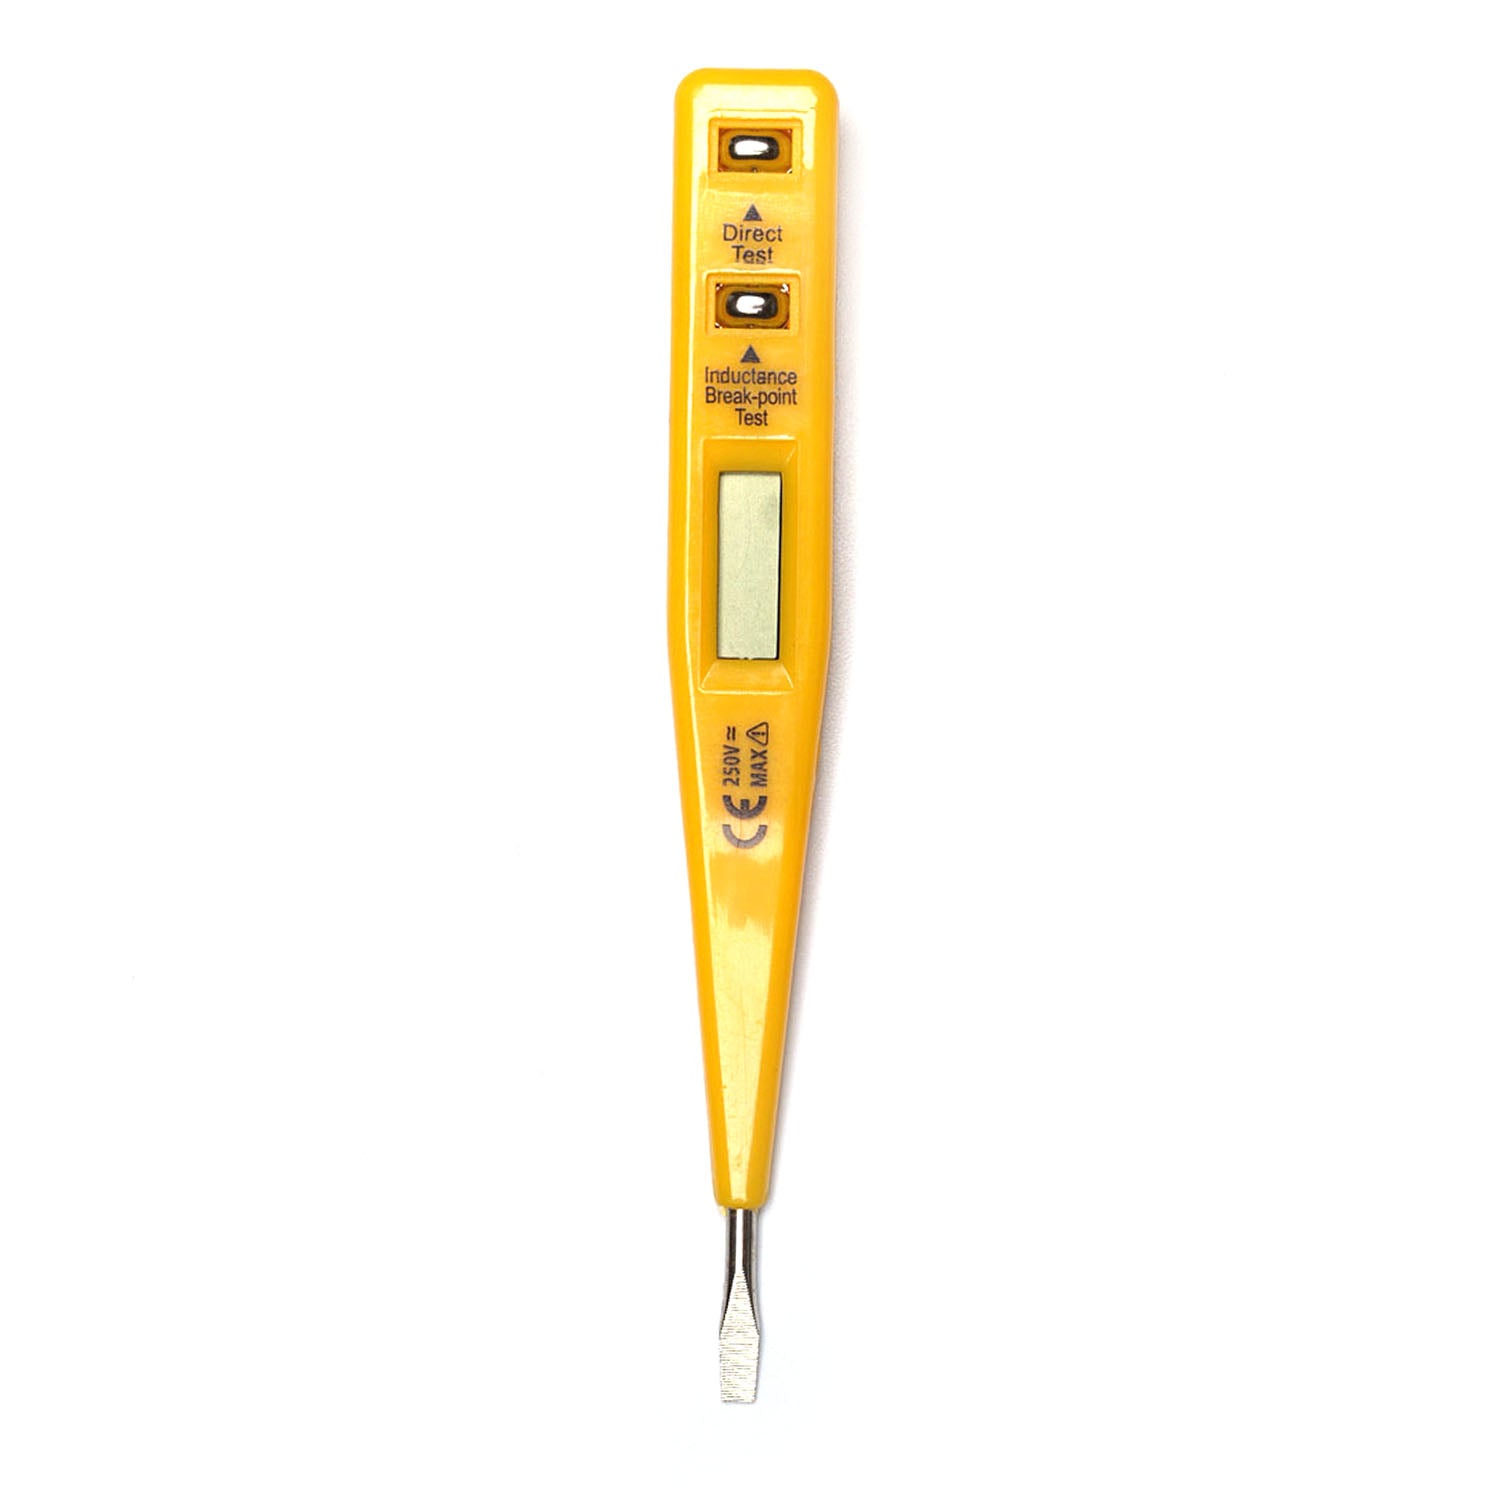 60-MM1004 AC voltage detector w/yellow